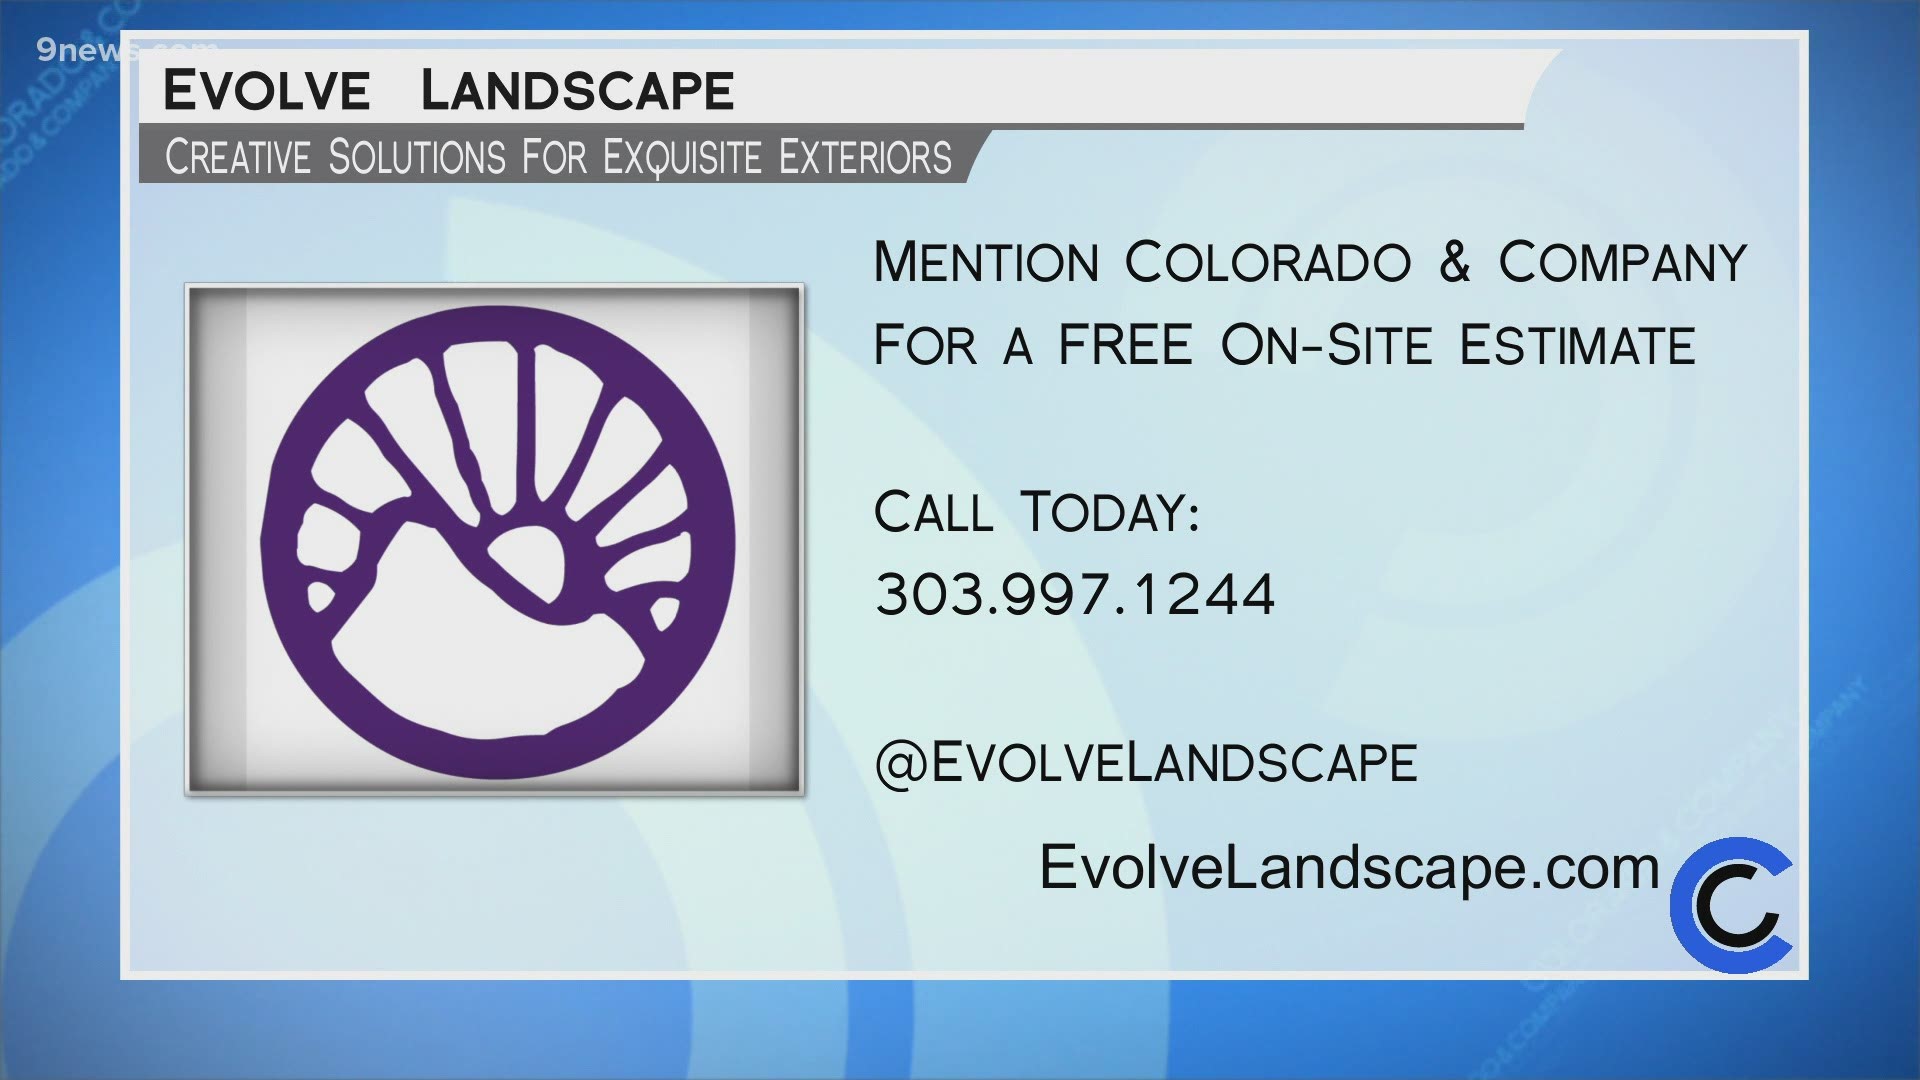 Call 303.997.1244 and talk to Evolve Landscape about creating and outdoor space that embodies you and your style. Learn more at EvolveLandscape.com.